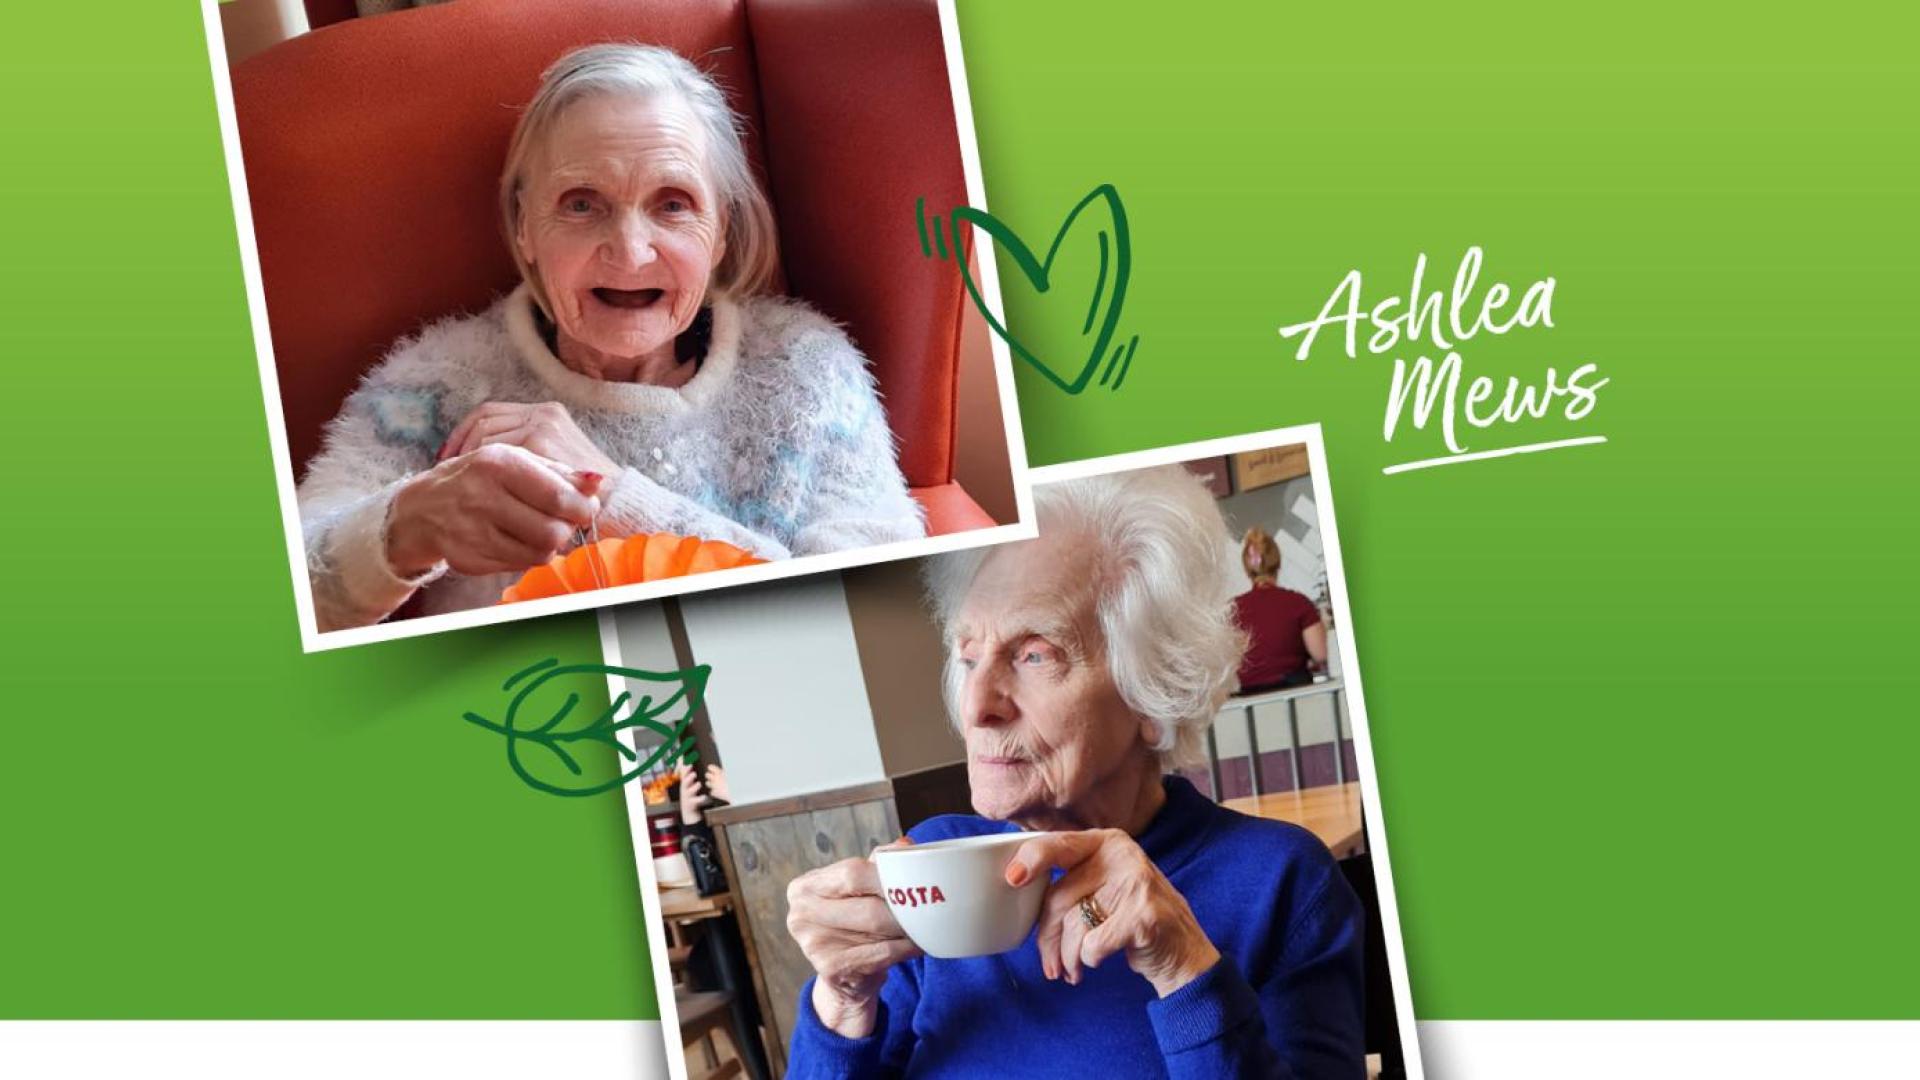 Residents at Ashlea Mews Care Home in South Shields